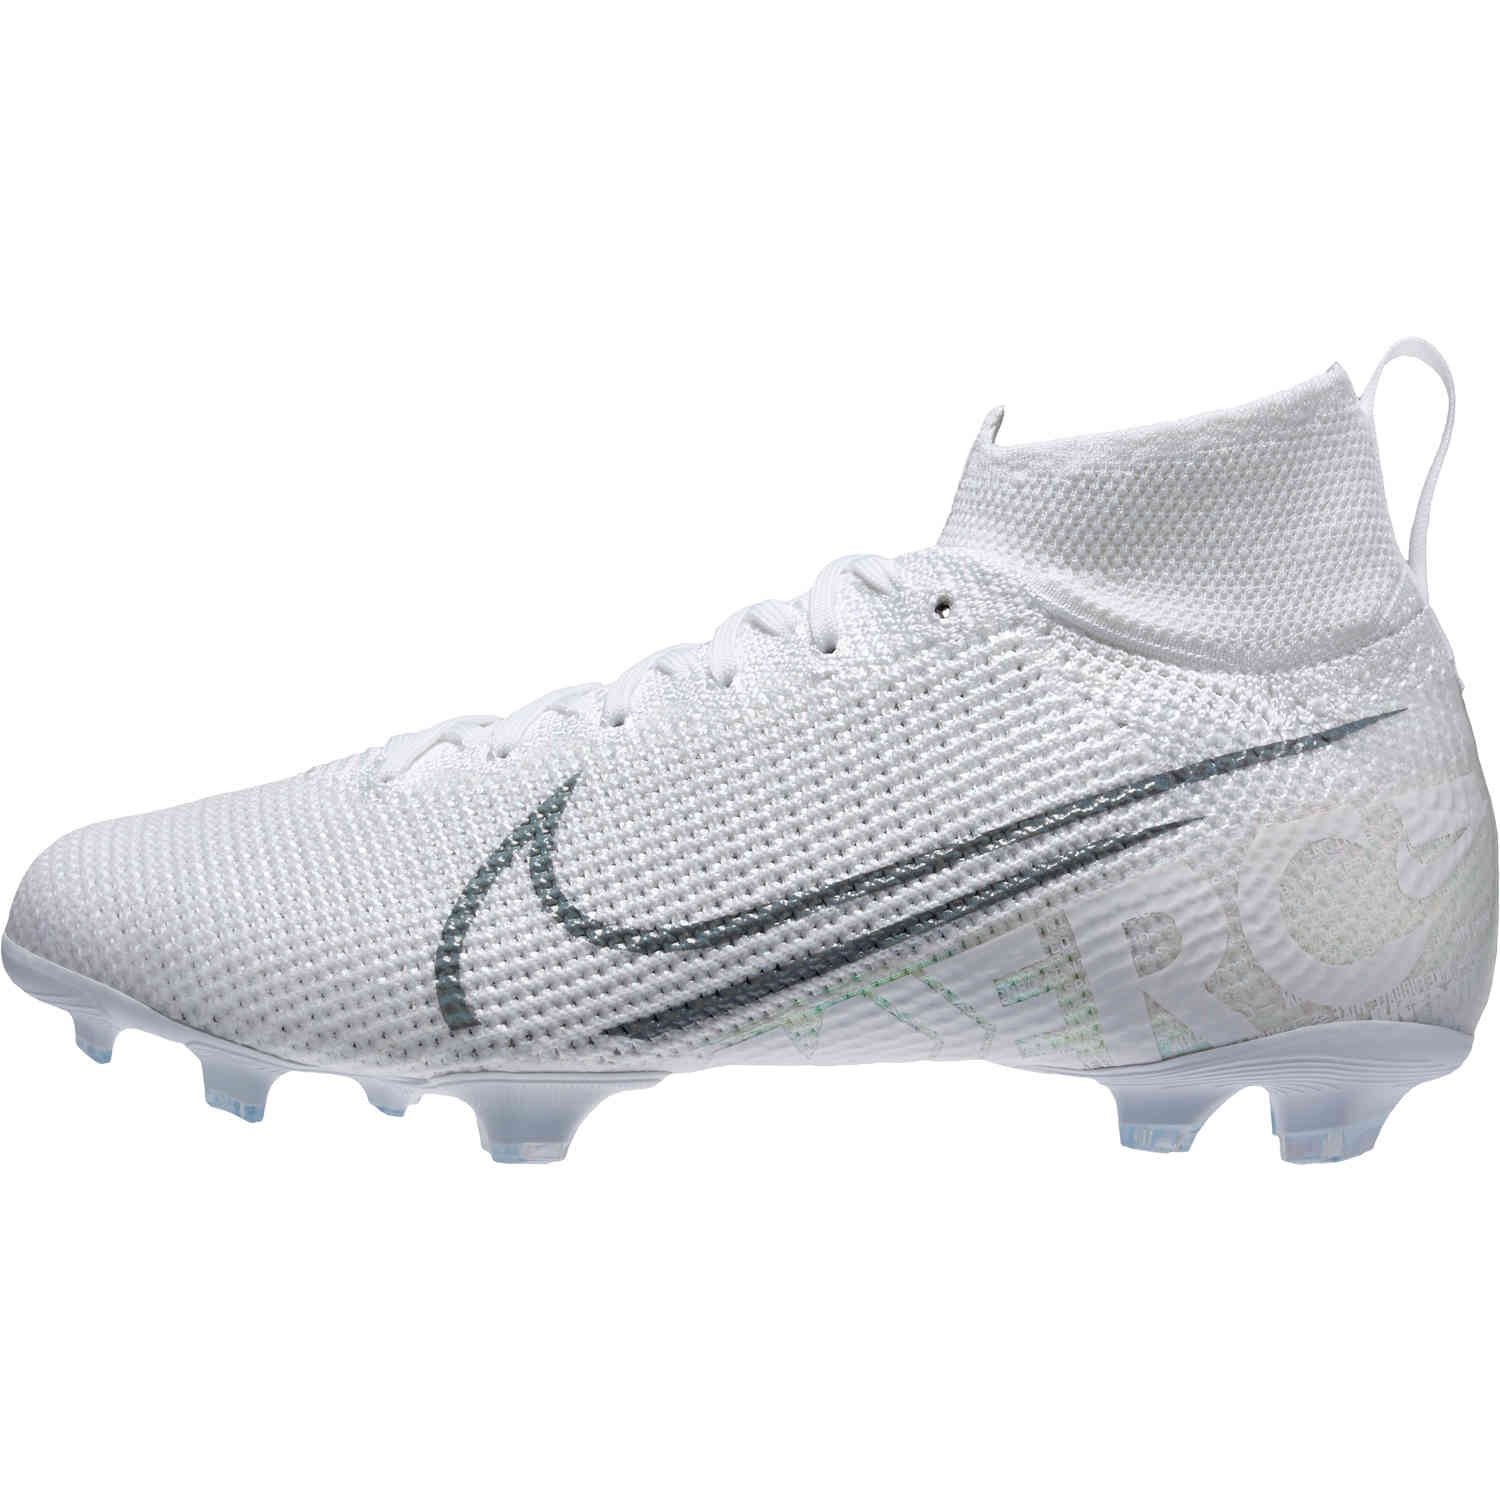 Nike Mercurial Superfly SG Studs Football Boots UK